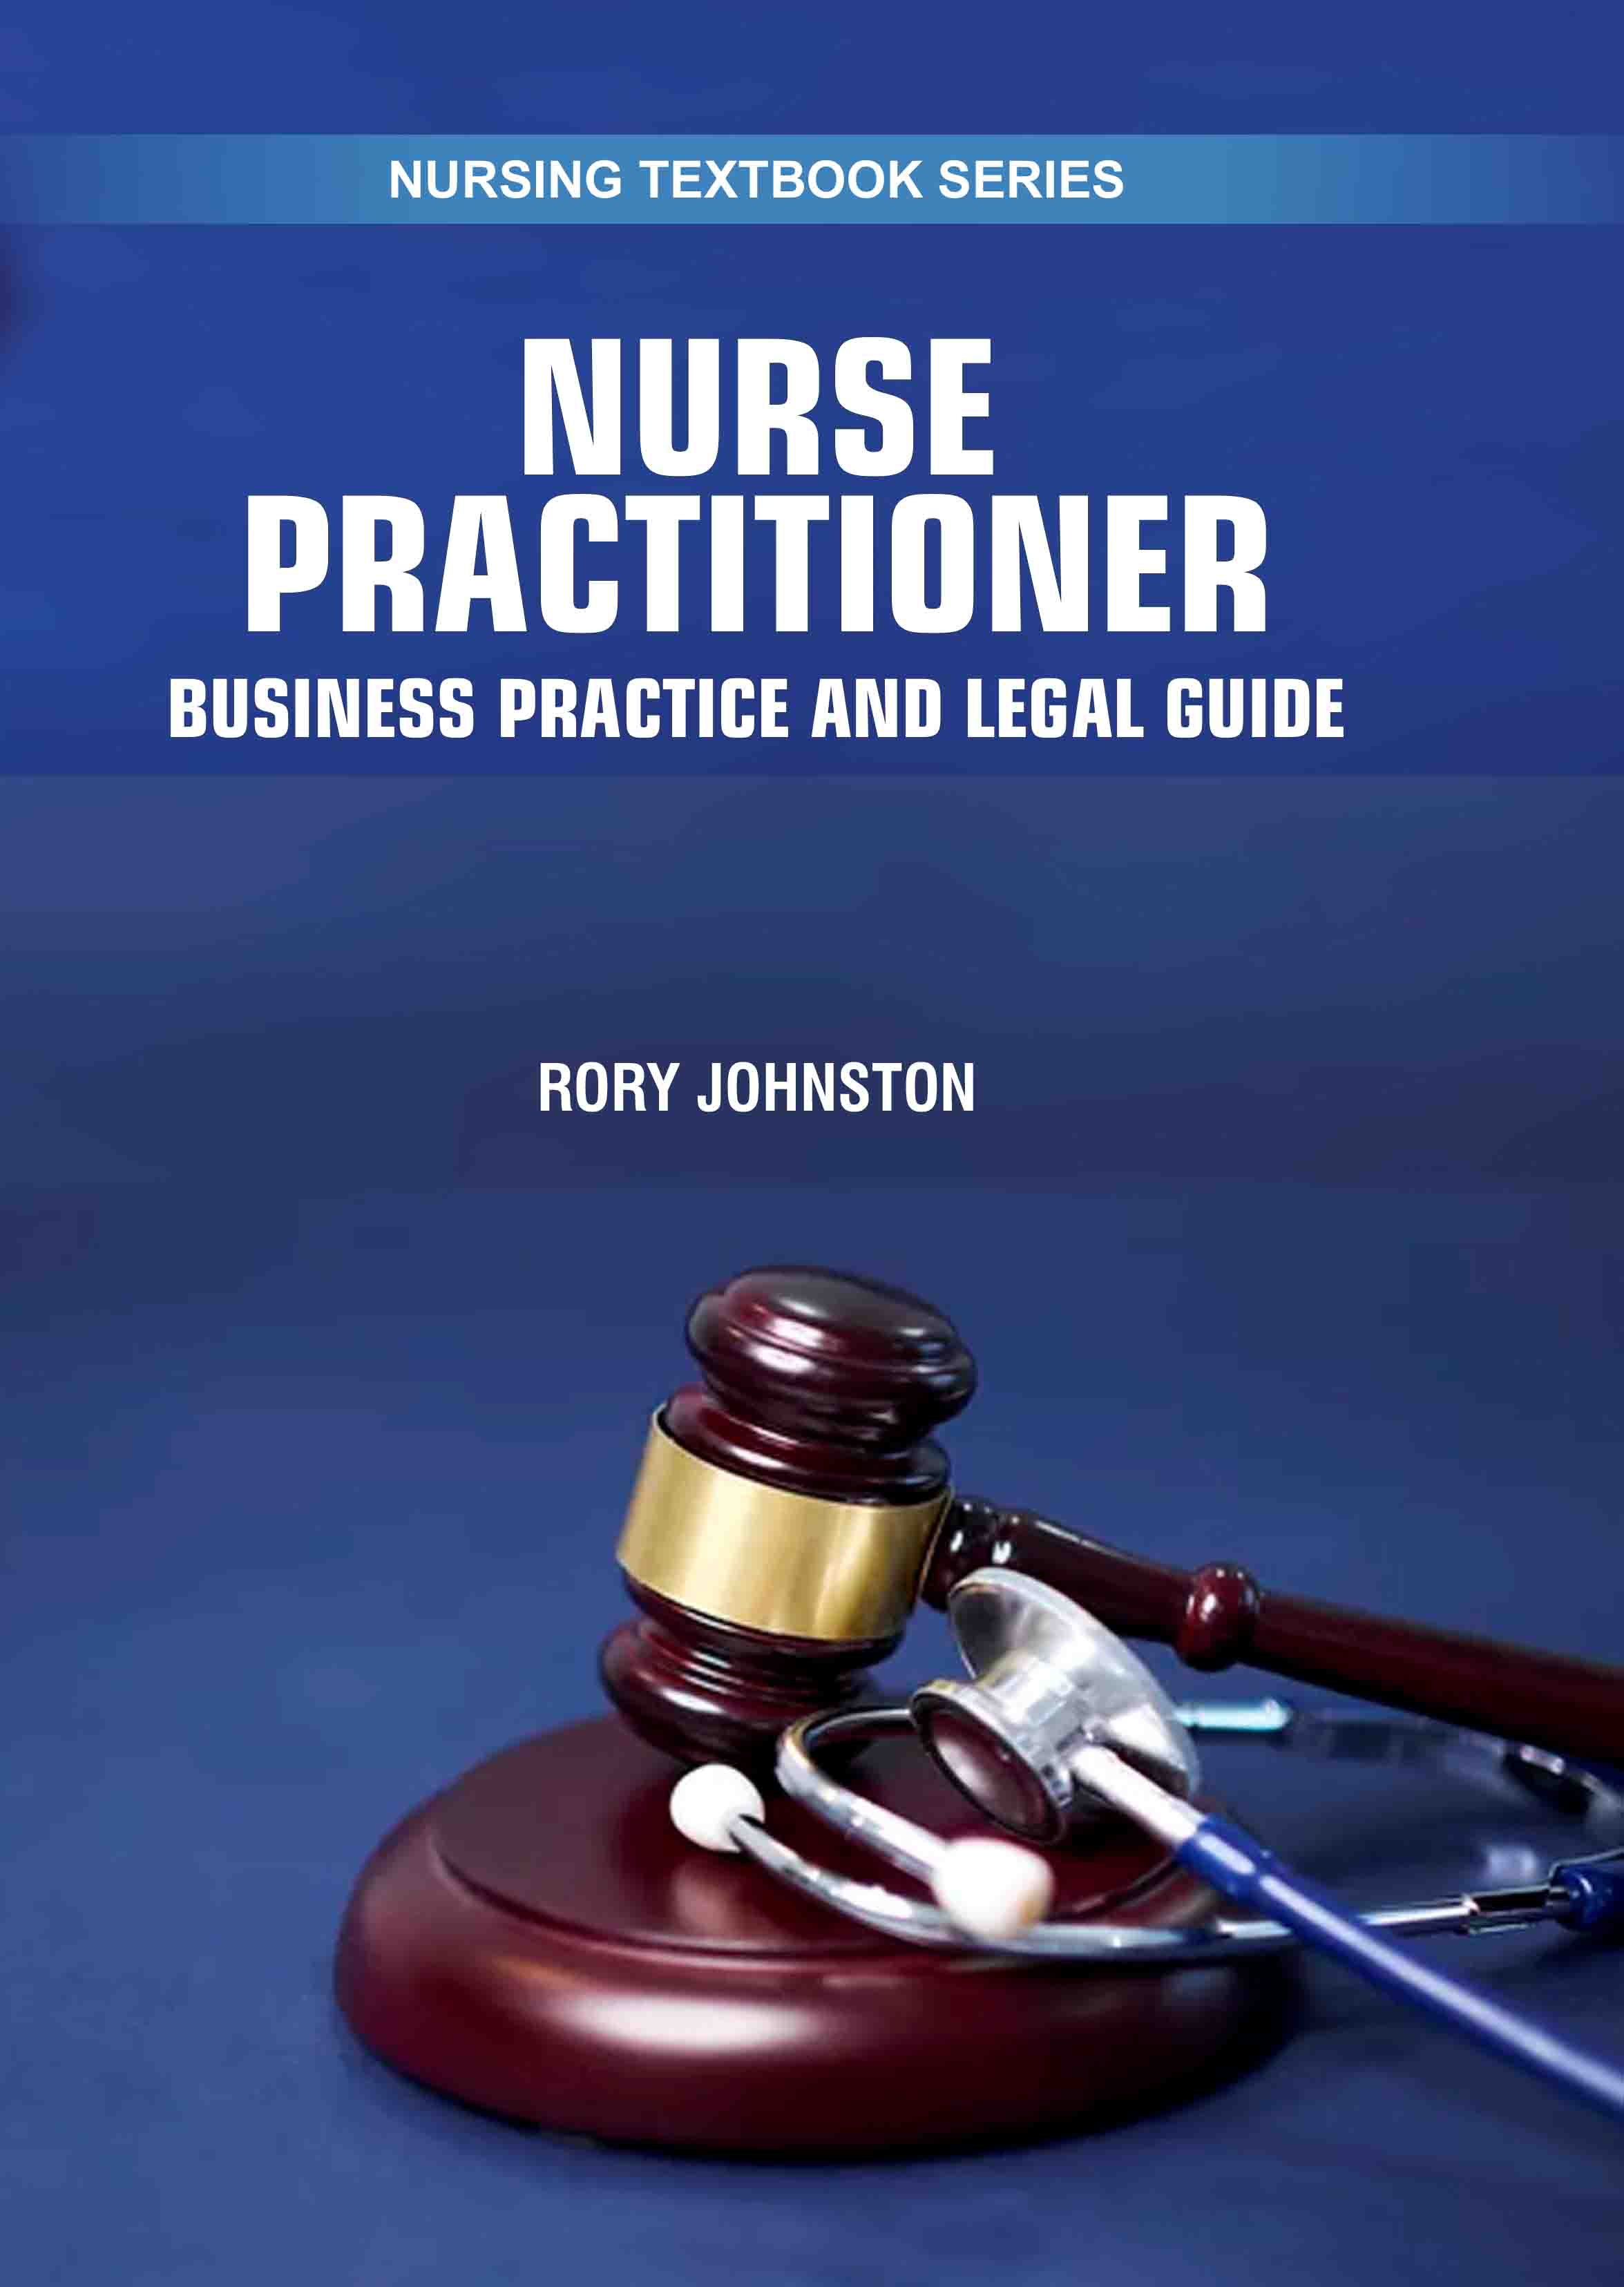 Nurse Practitioner: Business Practice and Legal Guide